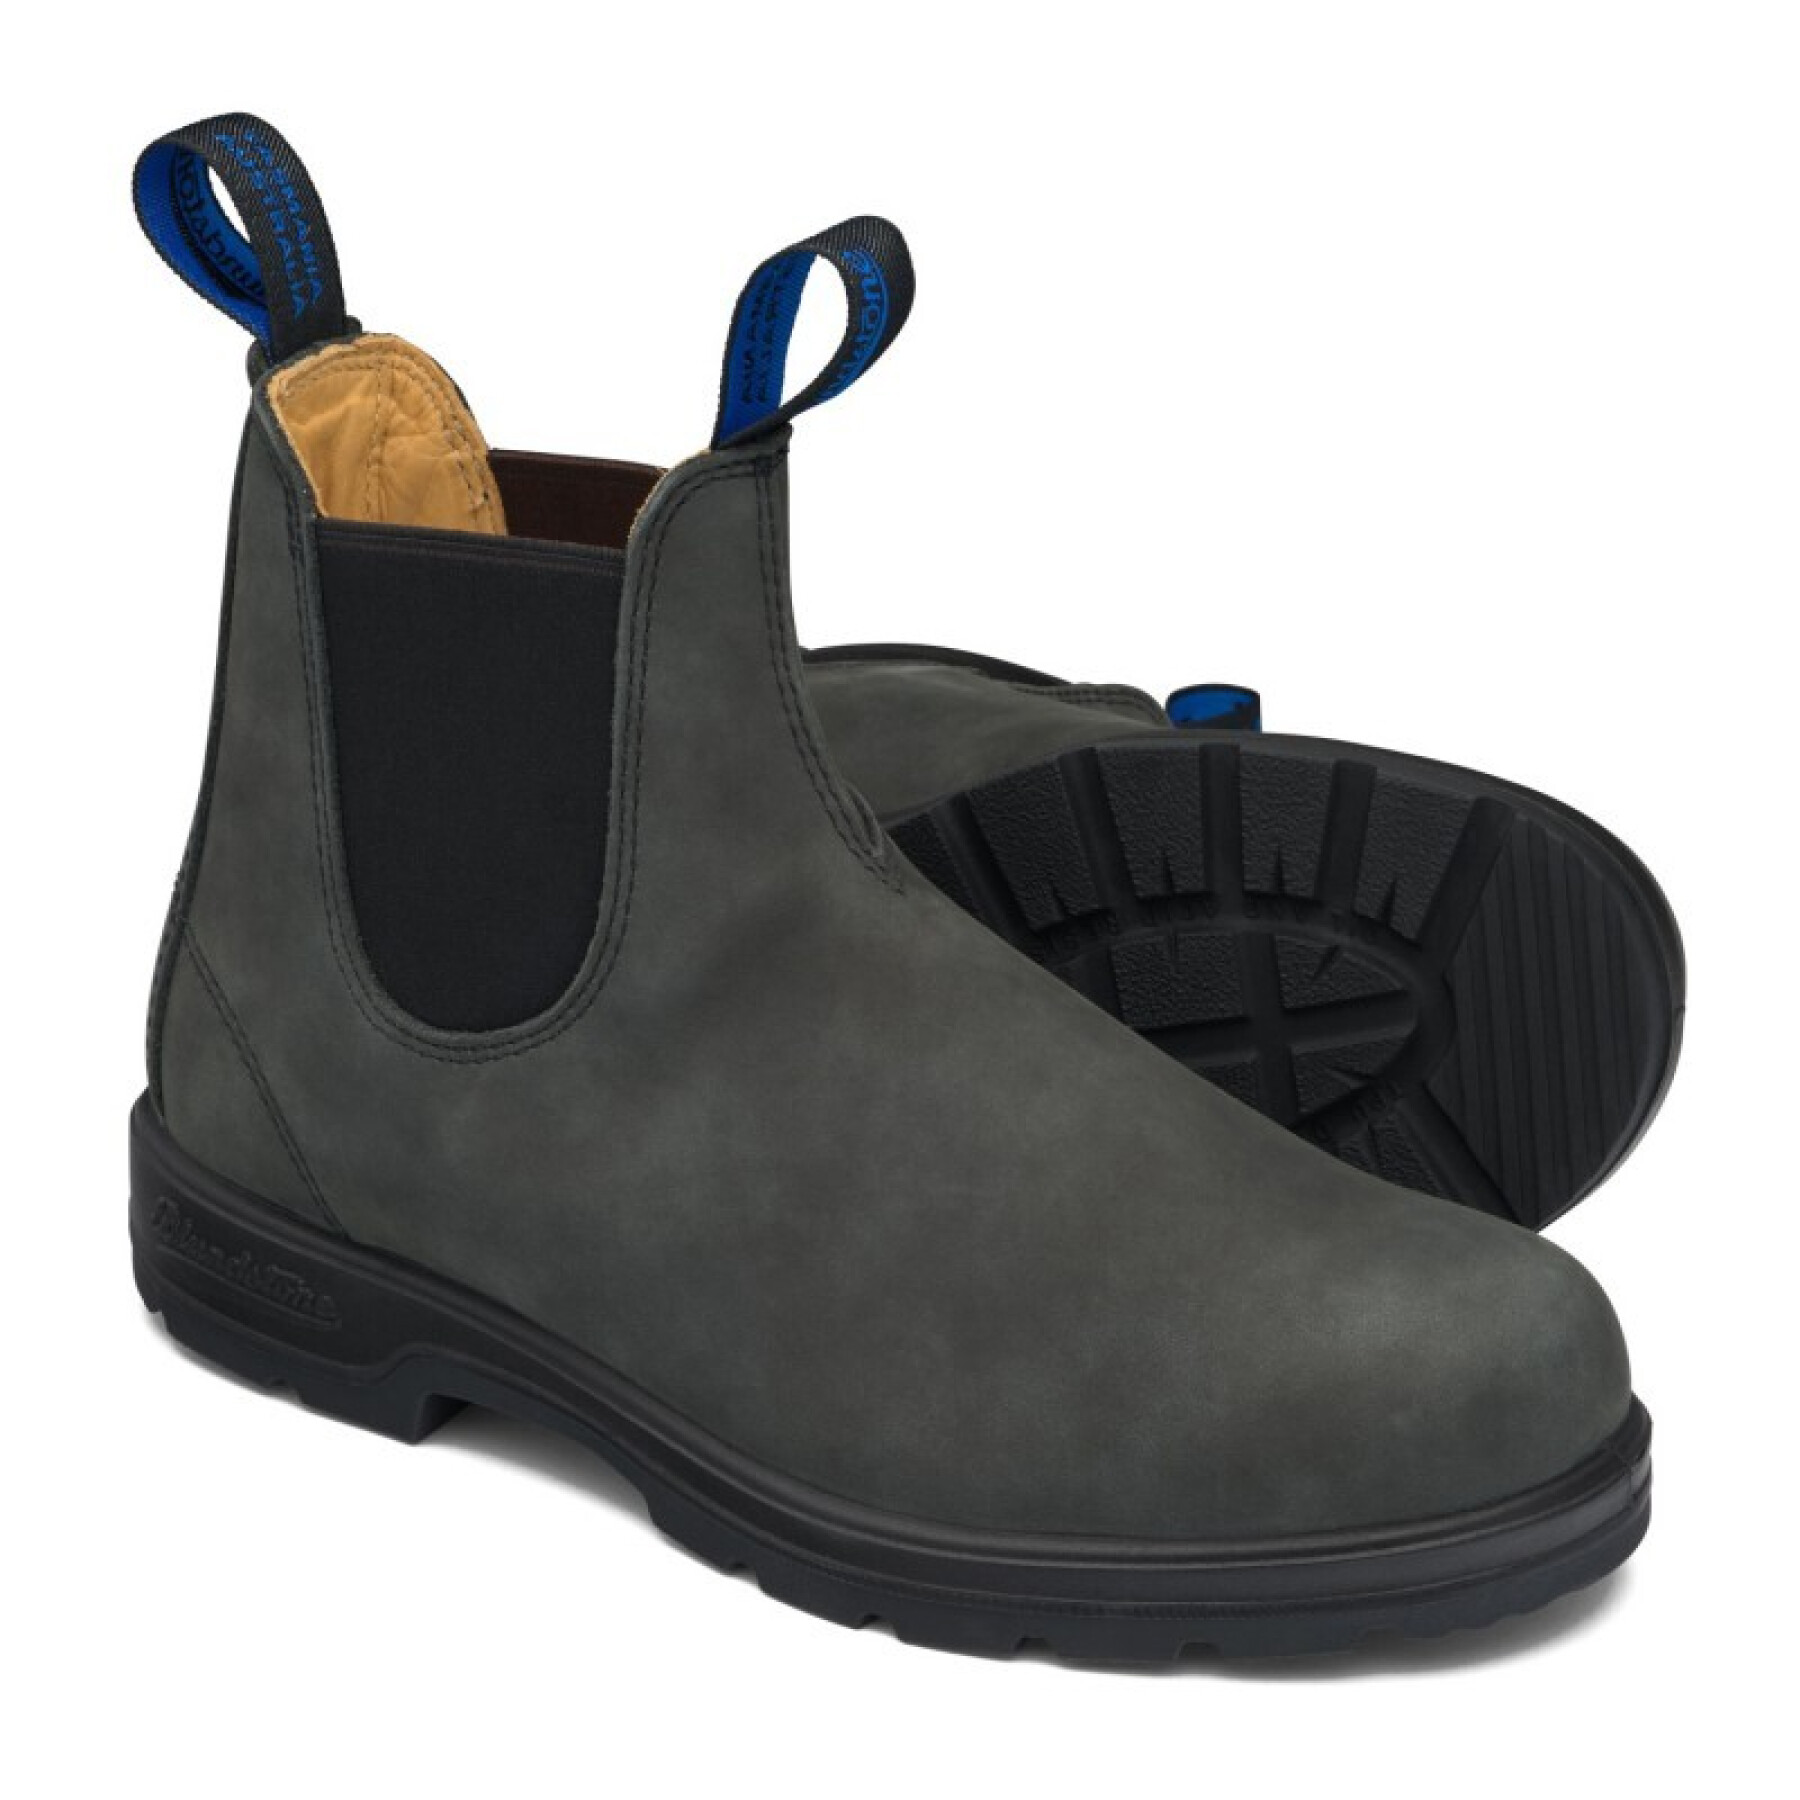 Thermal boots Blundstone Chelsea